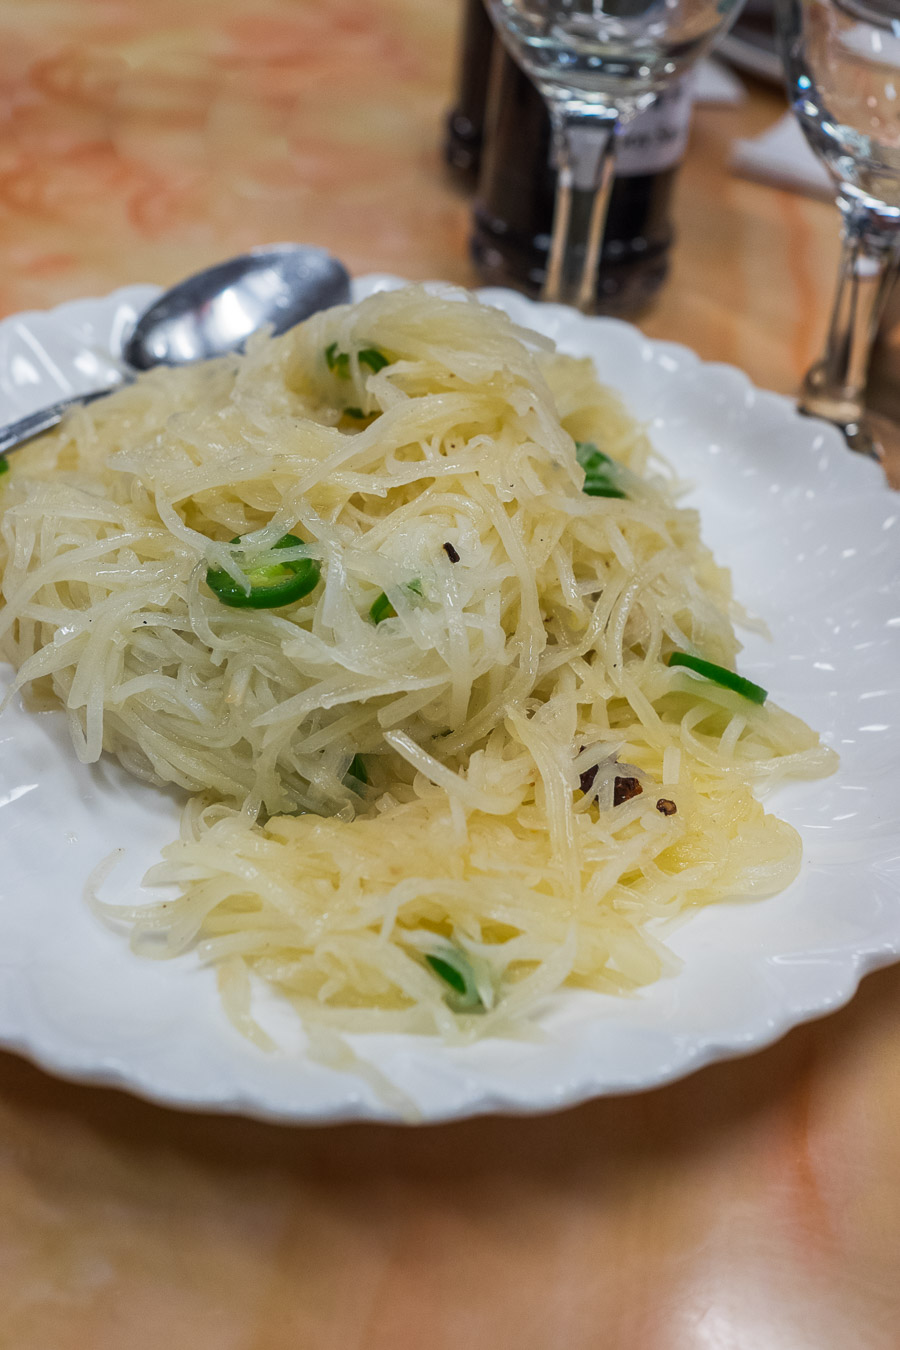 Spicy and sour shredded potato (AU$8)